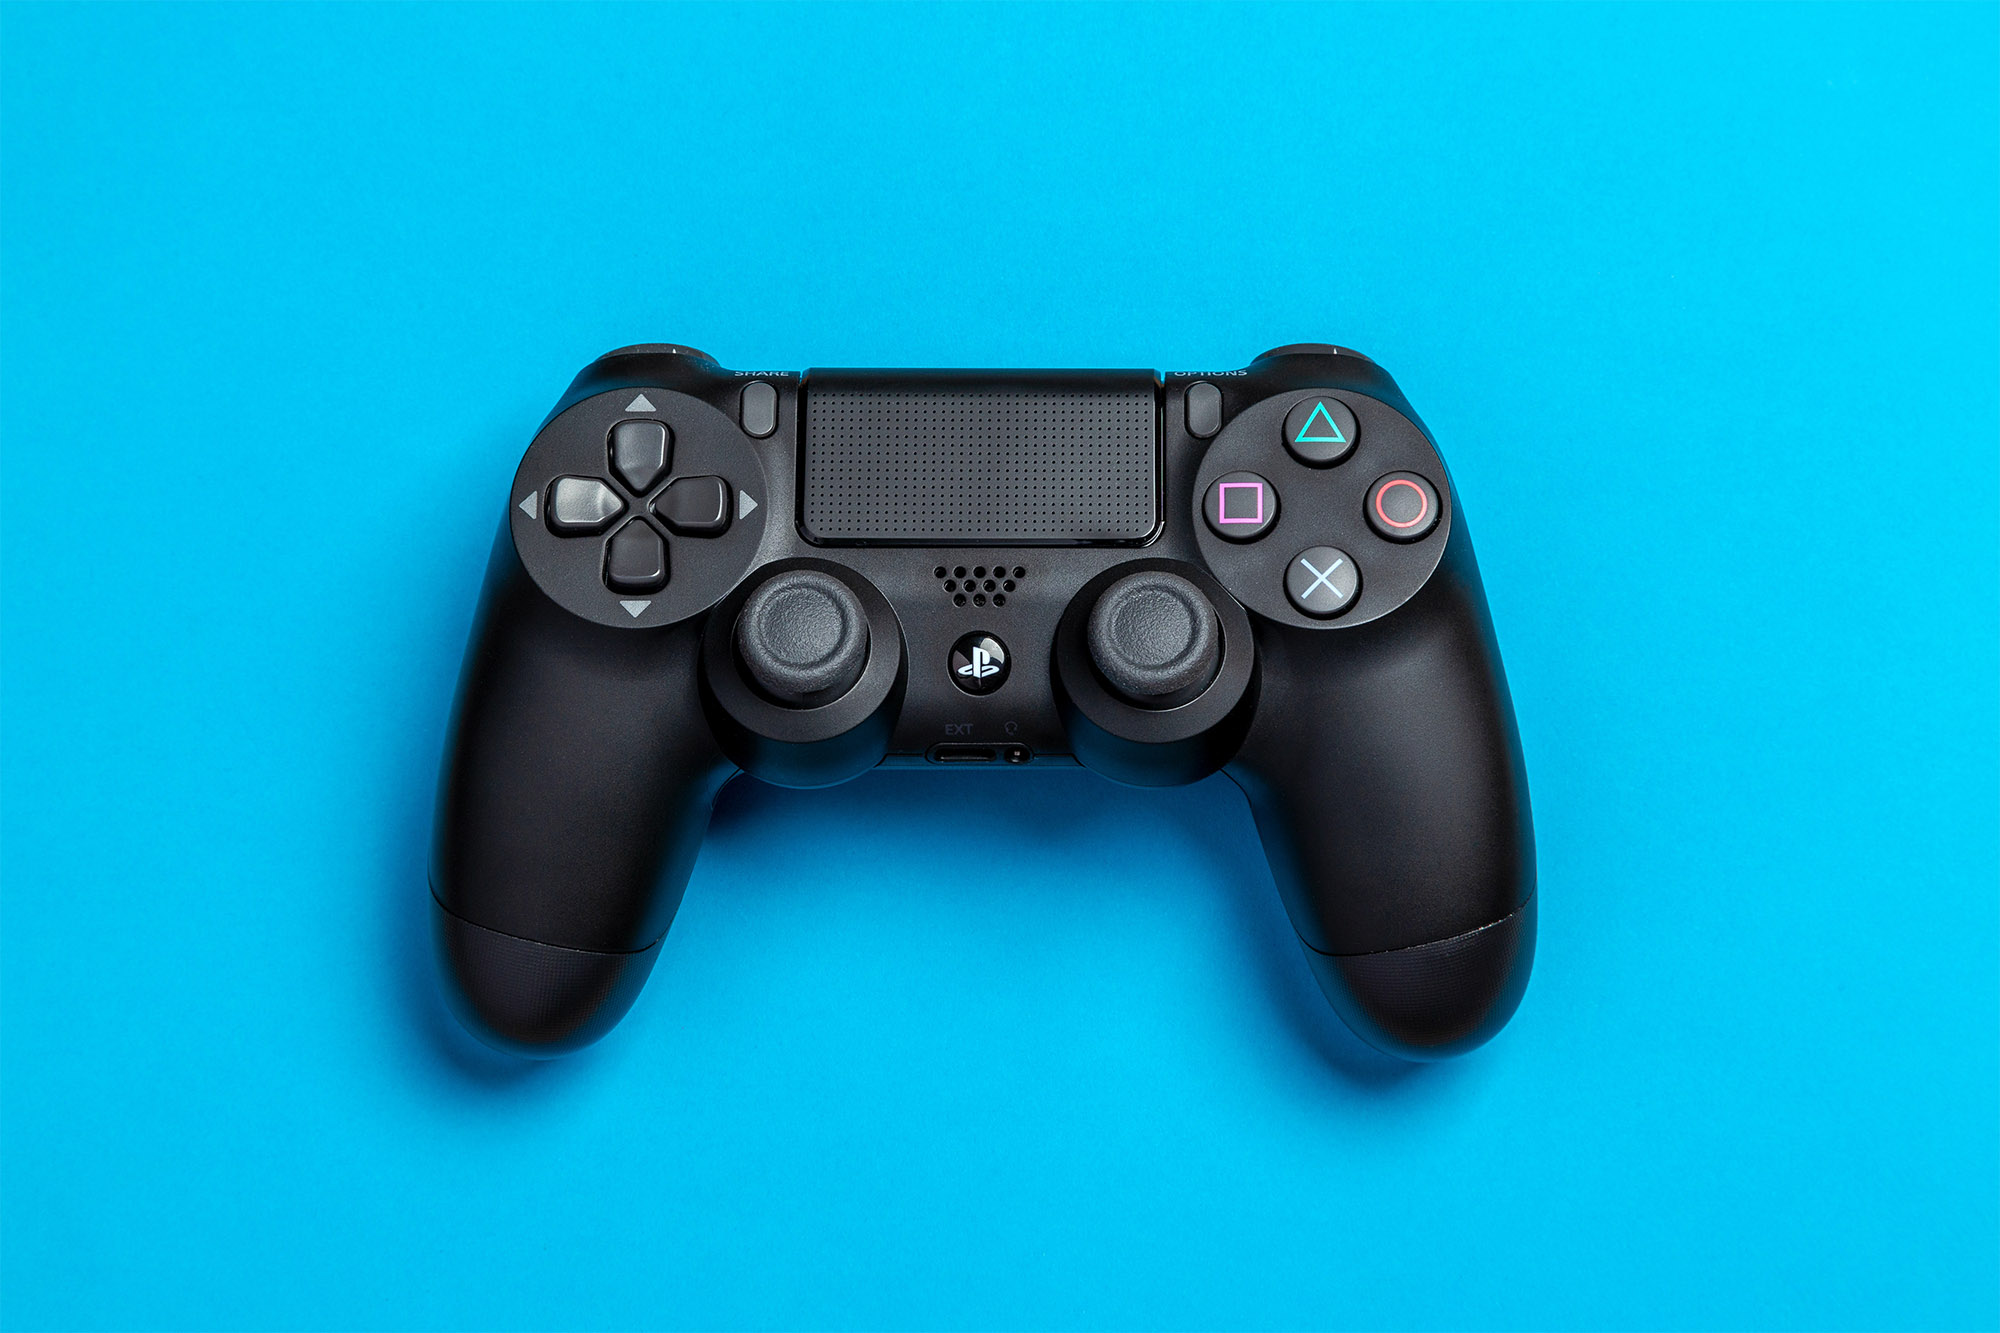 How to sync PS4 controller | Digital Trends